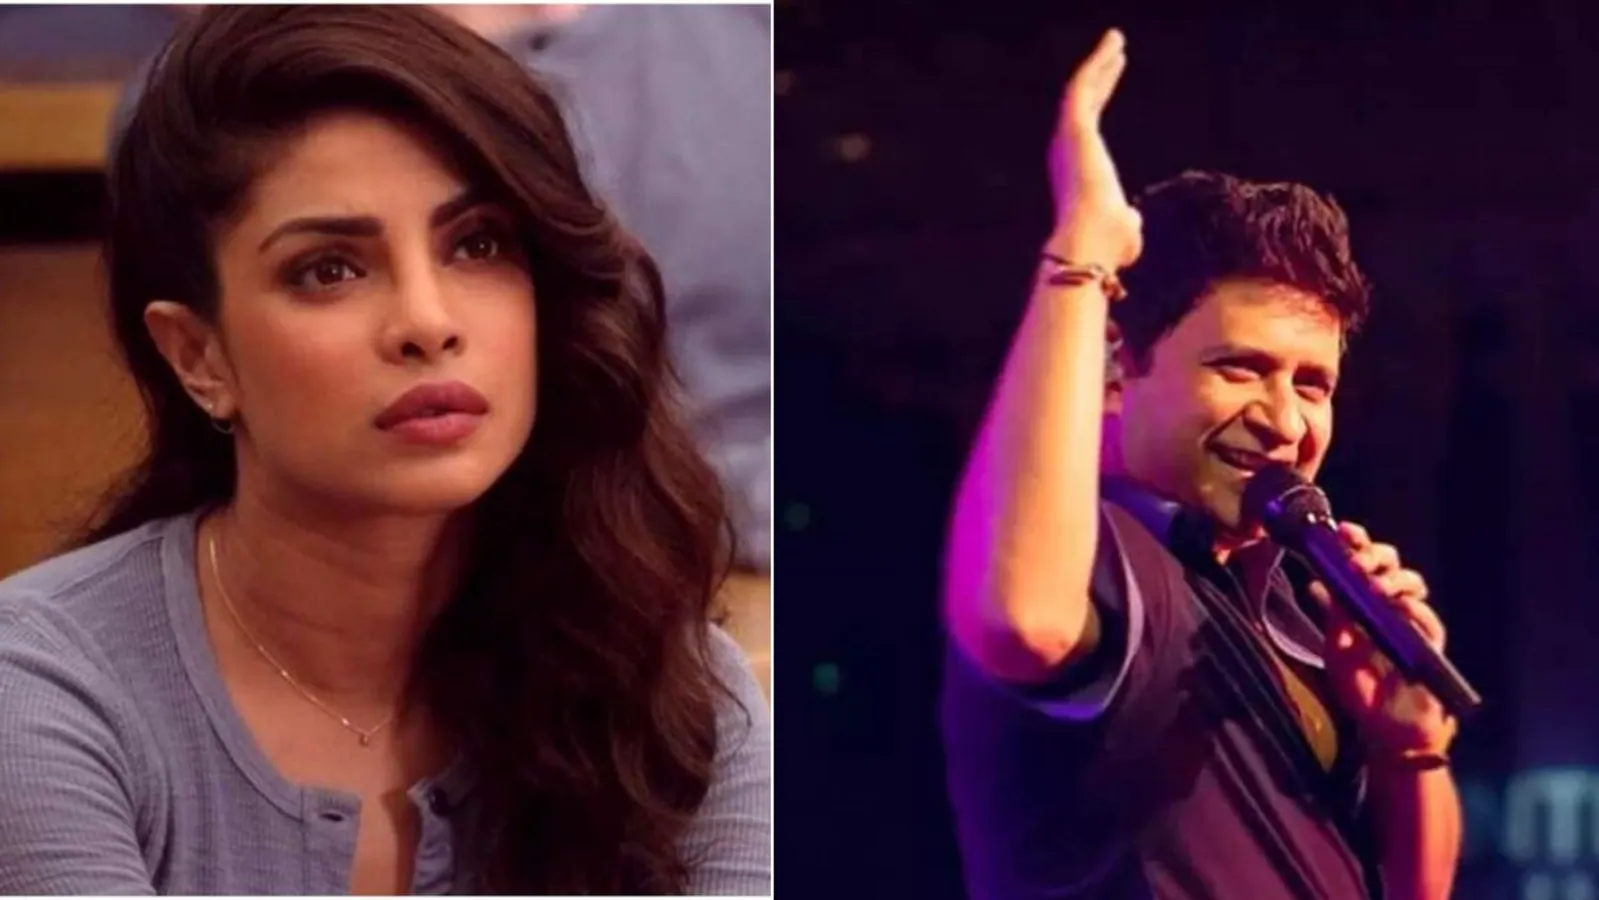 Priyanka Chopra shares video from KK’s concert, sends condolences to his family: ‘Gone too soon’. Watch